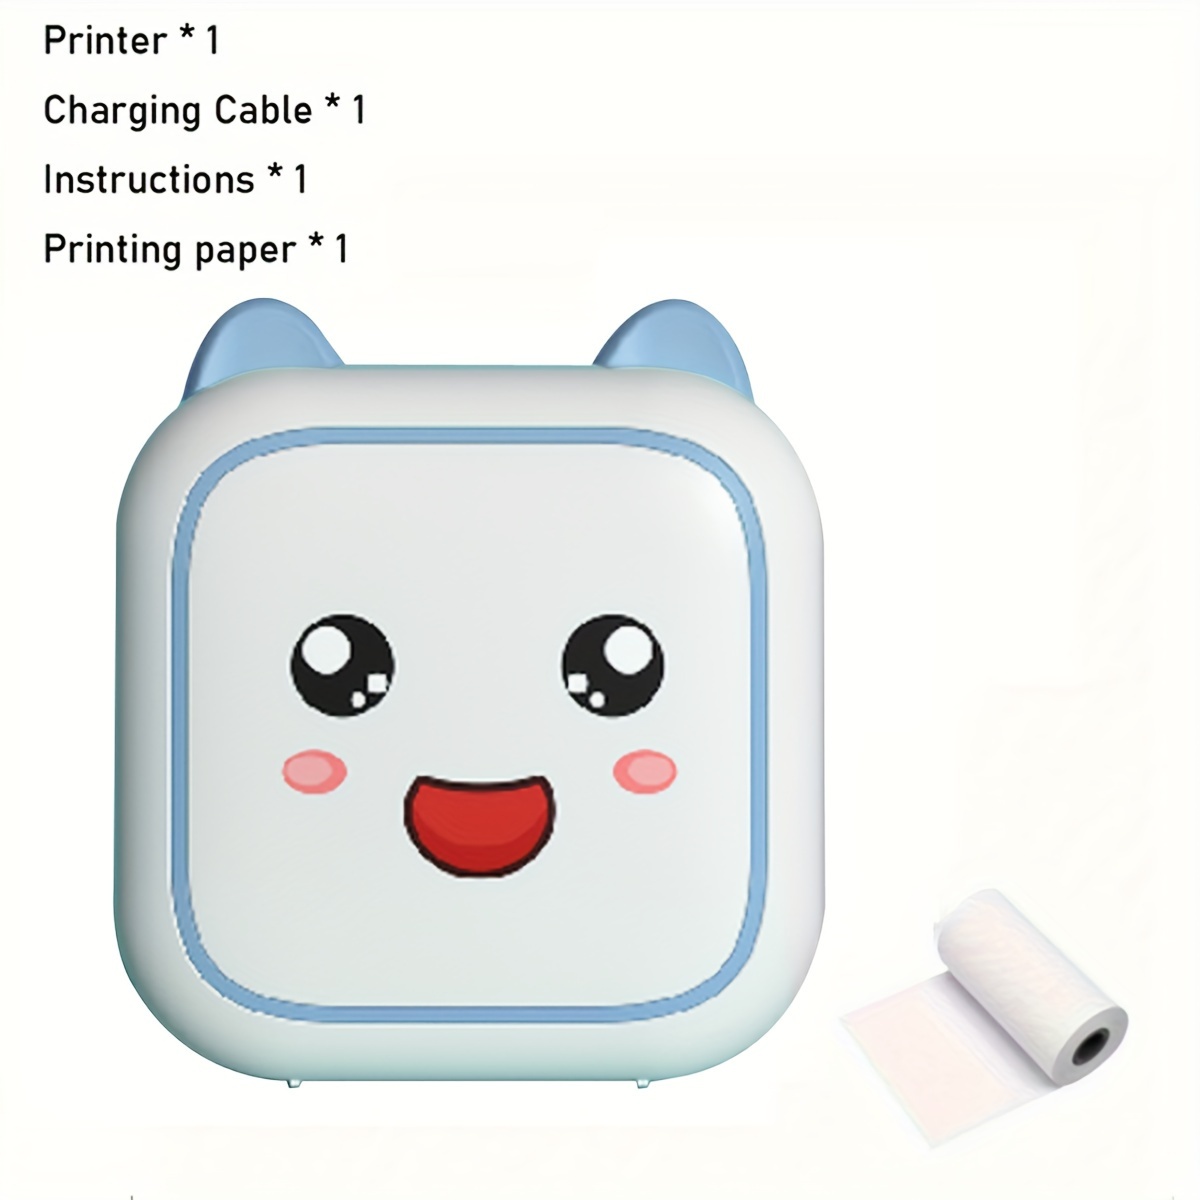 Portable Mini Thermal Printer Bluetooth Mobile Phone Photo Printer Built-In  Battery USB Charging with 1 Roll of Printing Paper